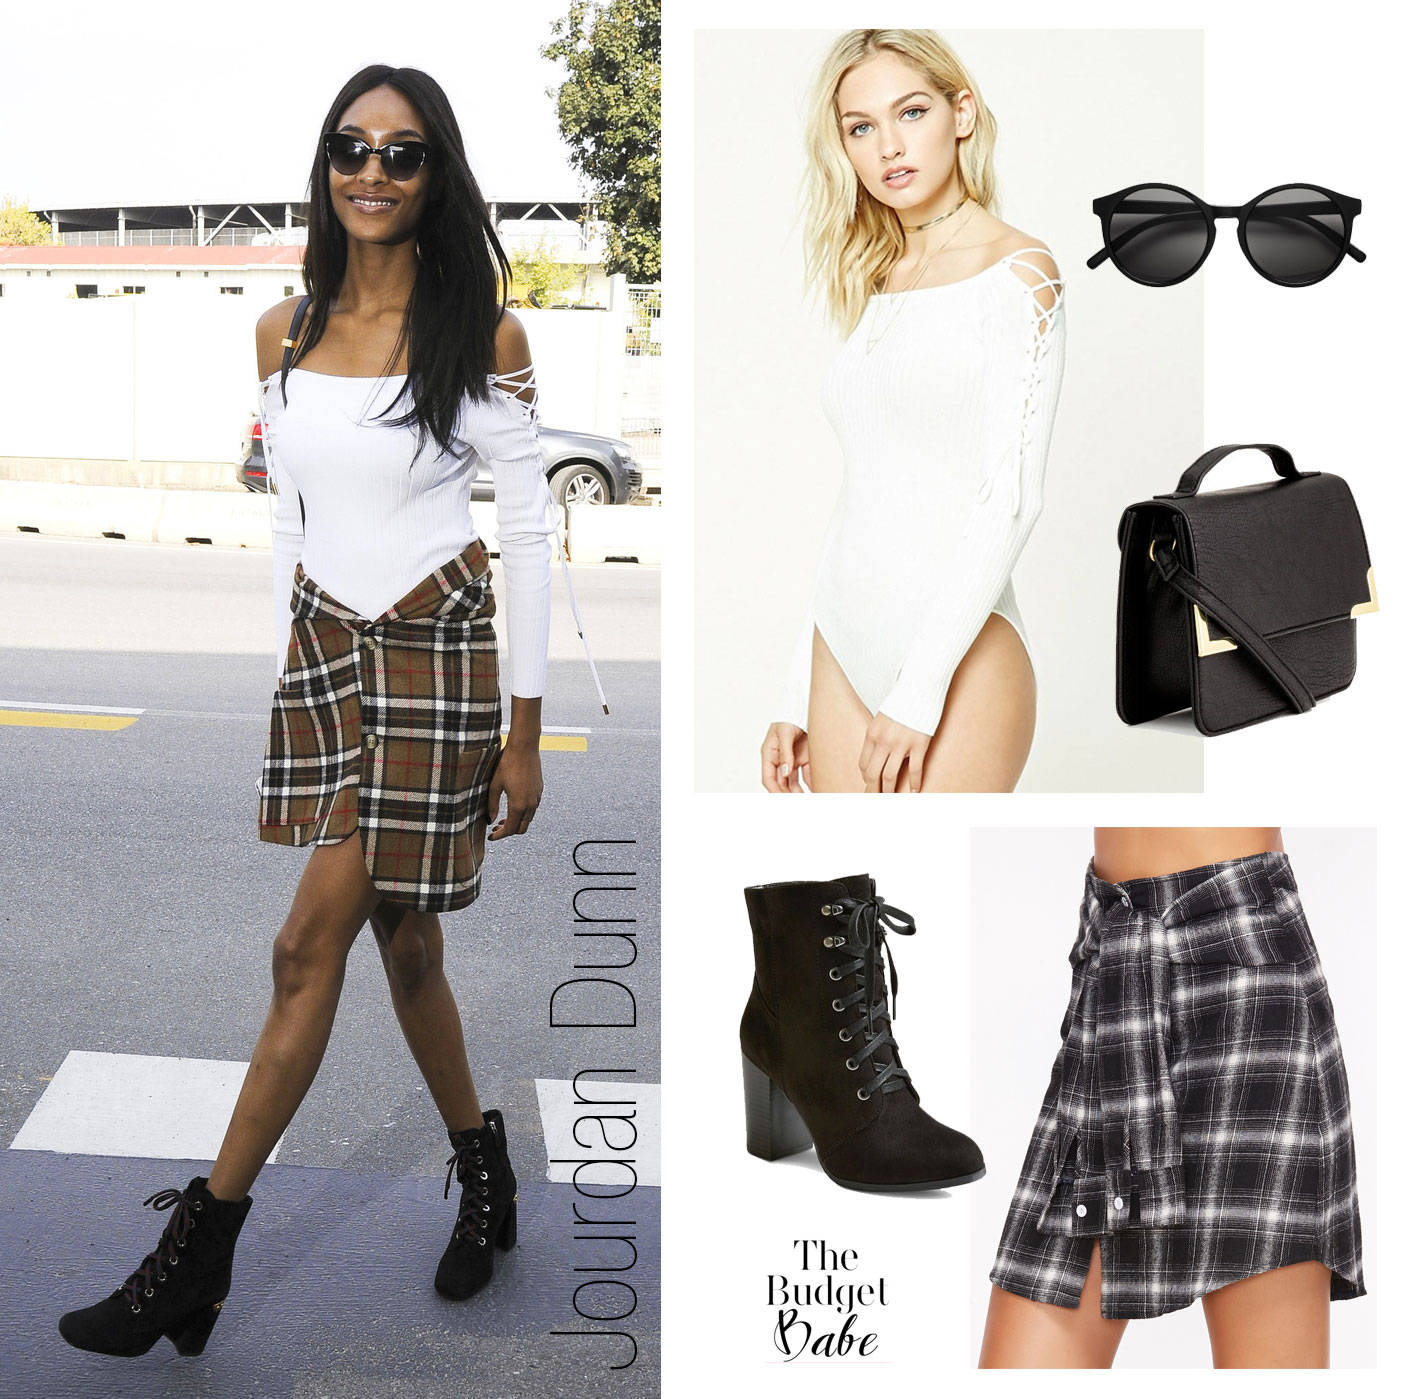 Get Jourdan Dunn's off-the-shoulder bodysuit and plaid skirt look for less.